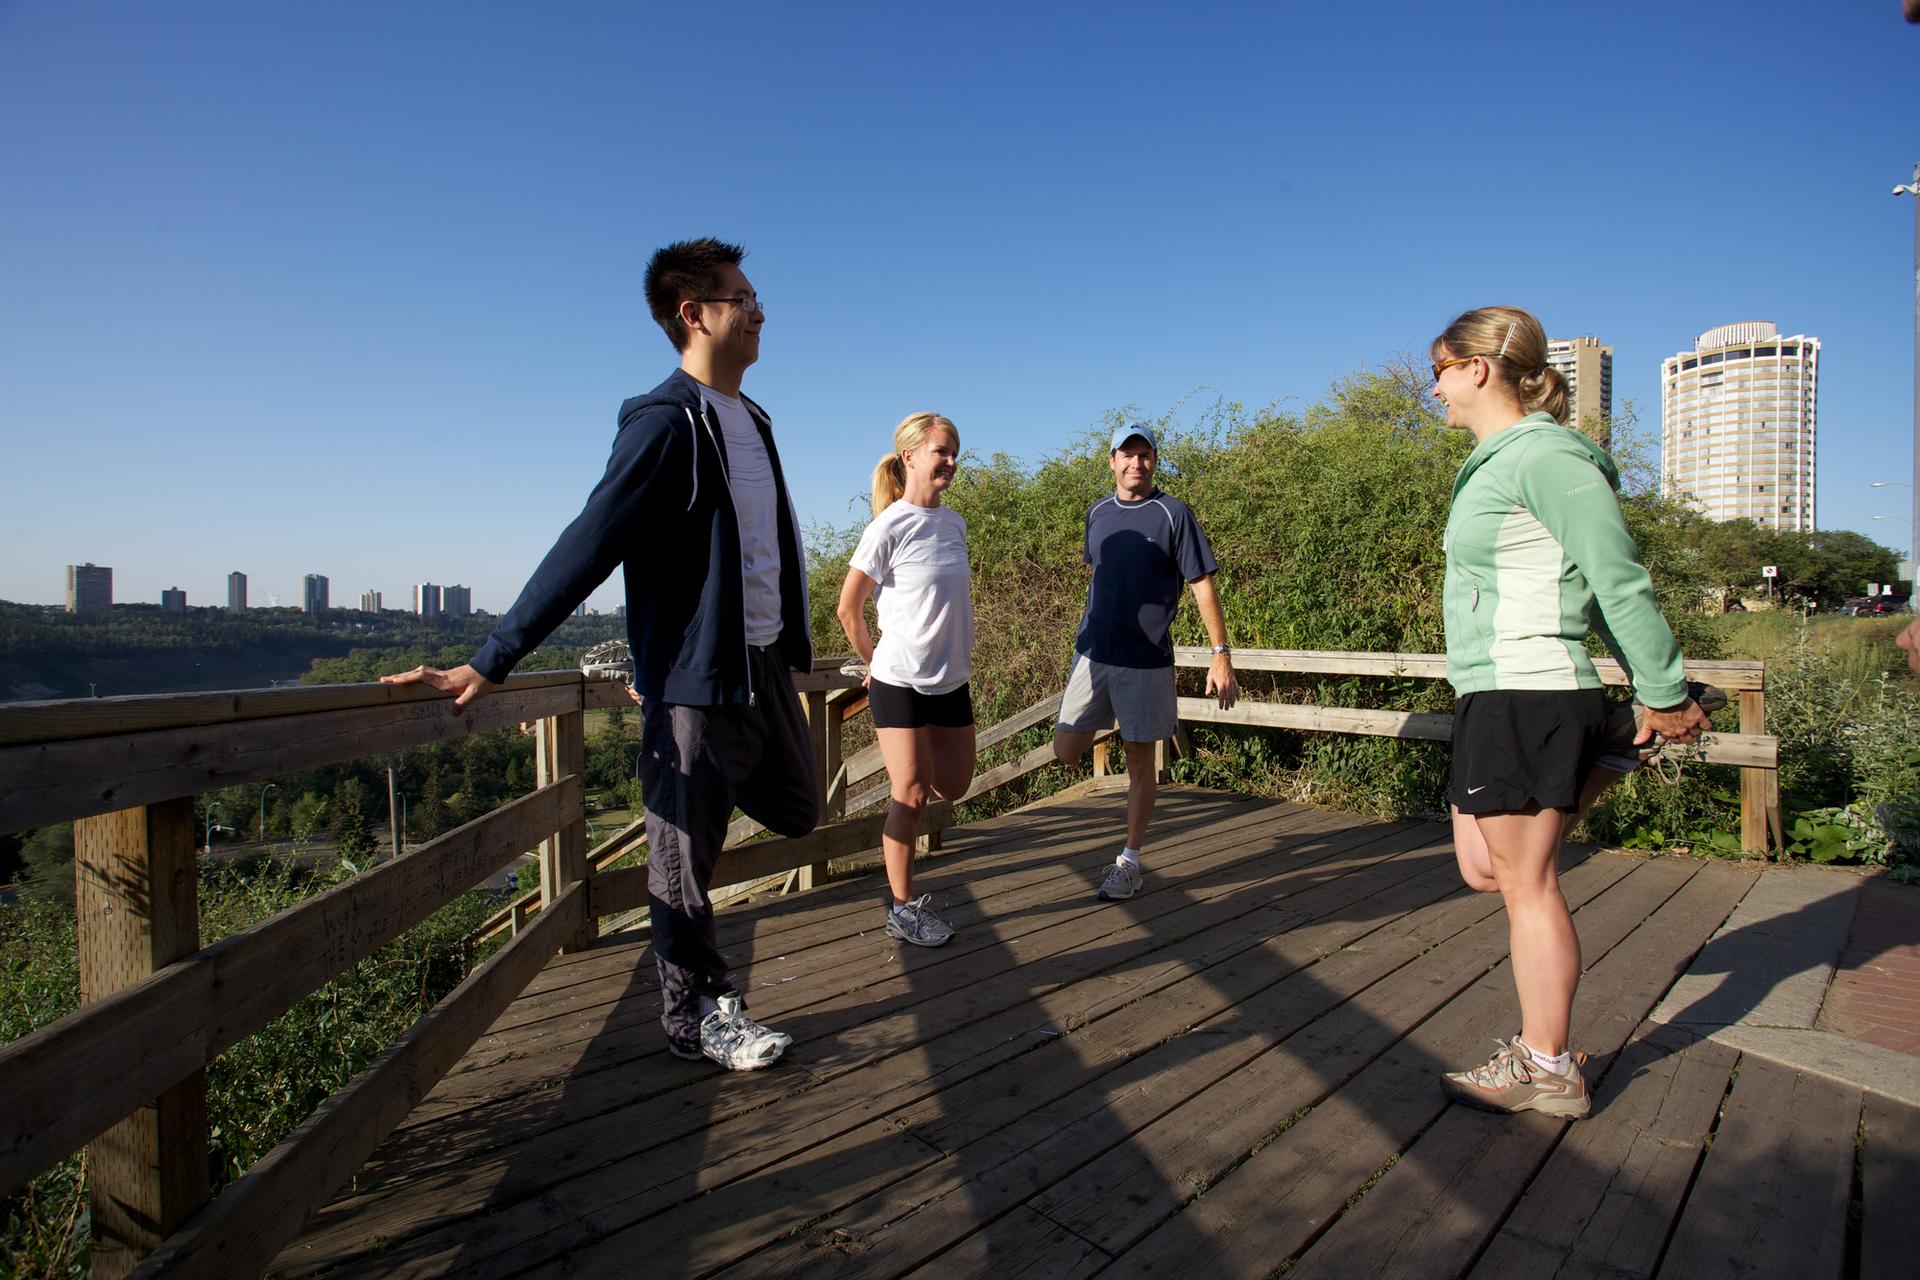 Running Concierge guides guests through the largest urban park in Canada